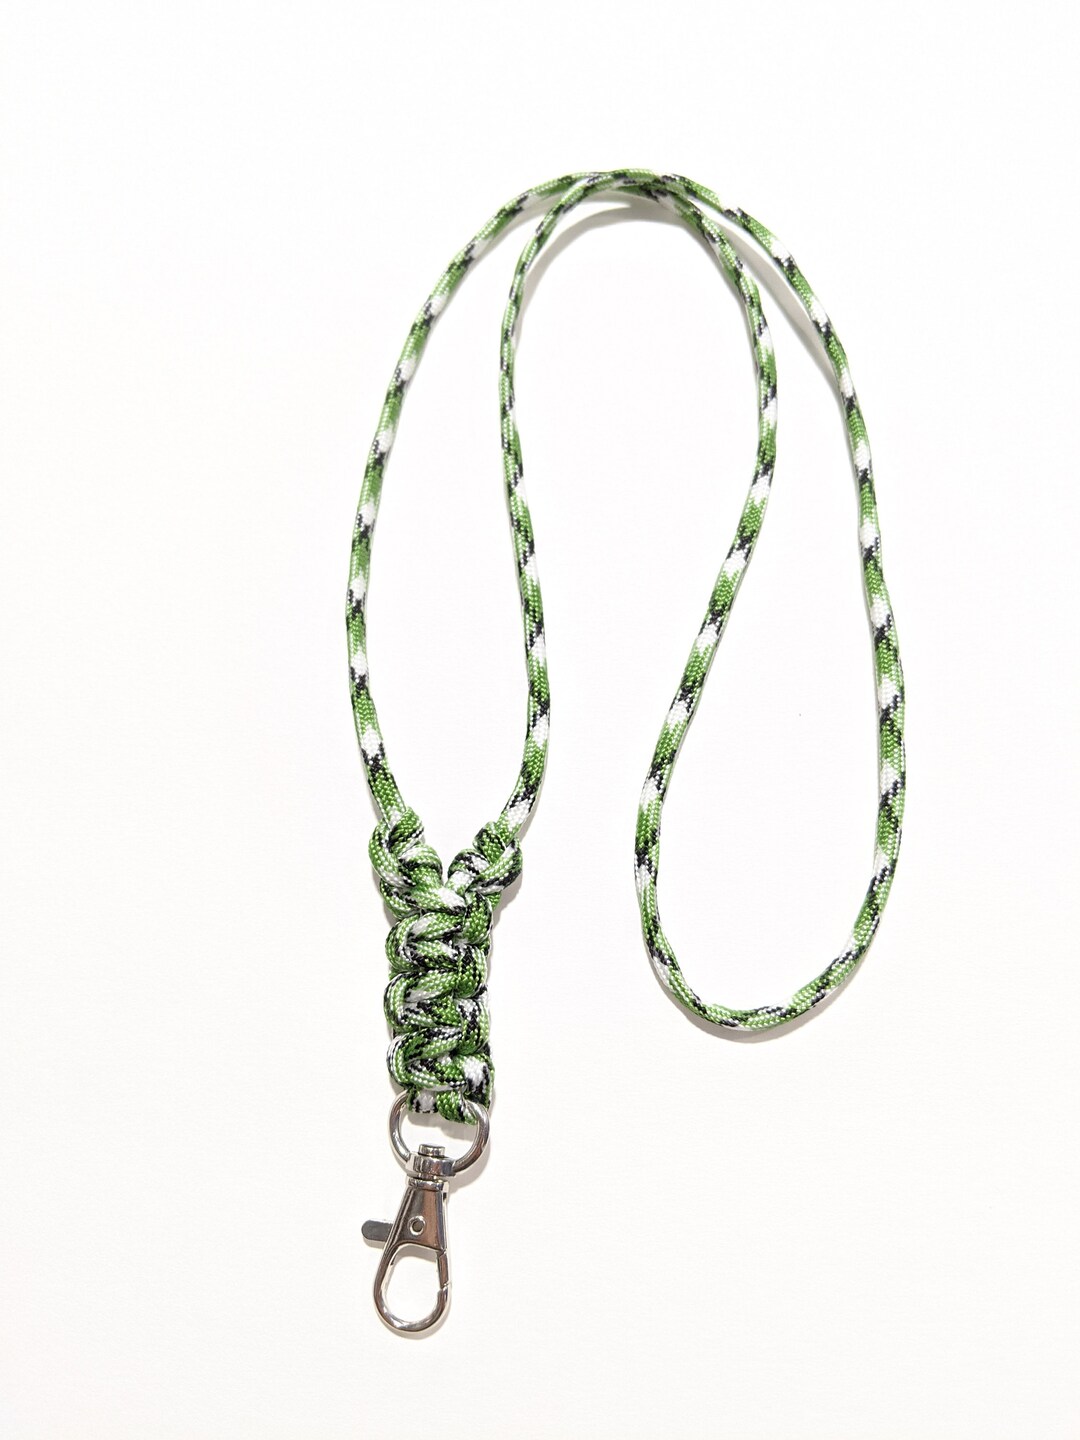 Green, Black and White Minimalist Paracord or Parachute Cord ID Lanyard ...